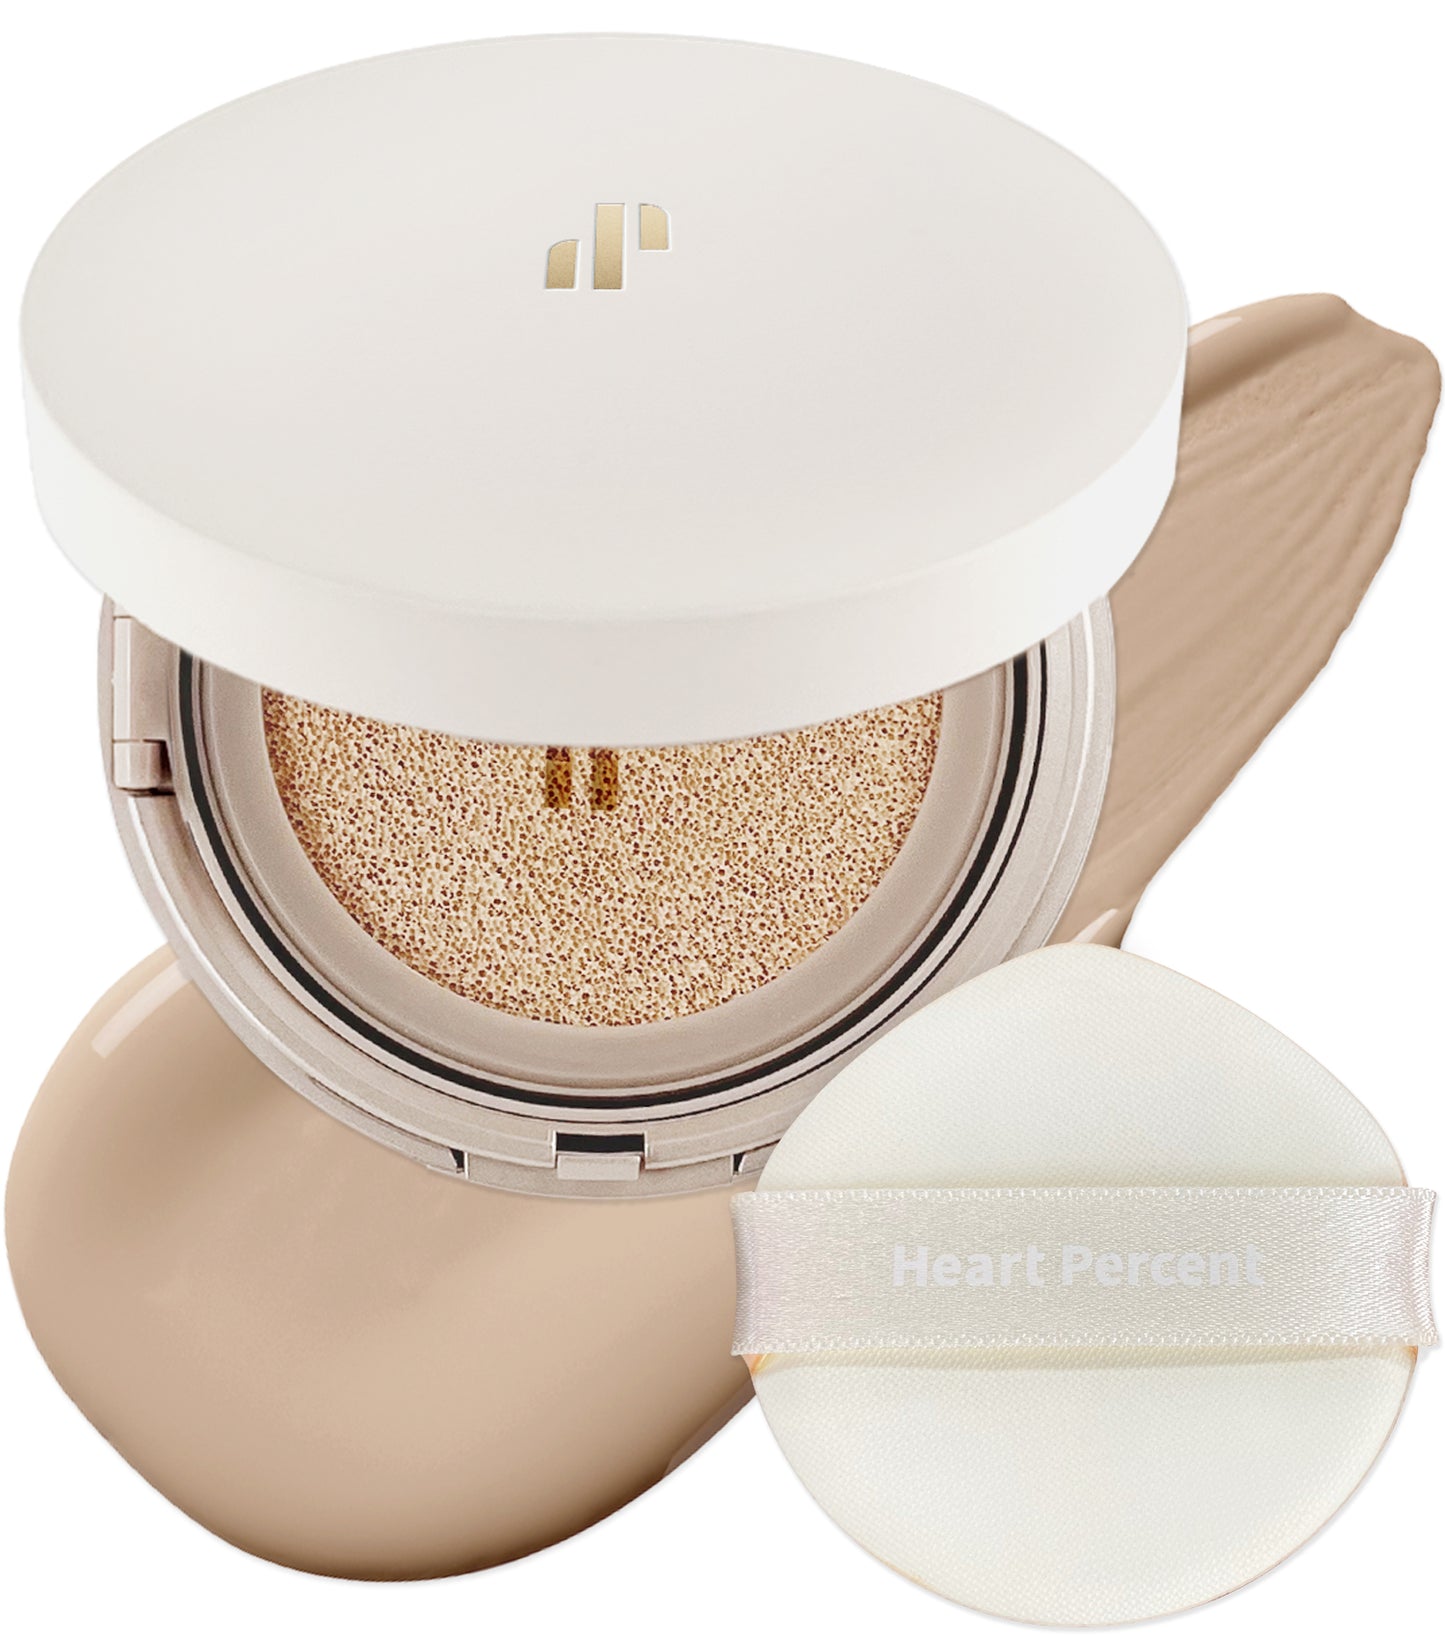 Heart Percent Dote on Mood Layer Cushion SPF 50+/PA+++ with Refill